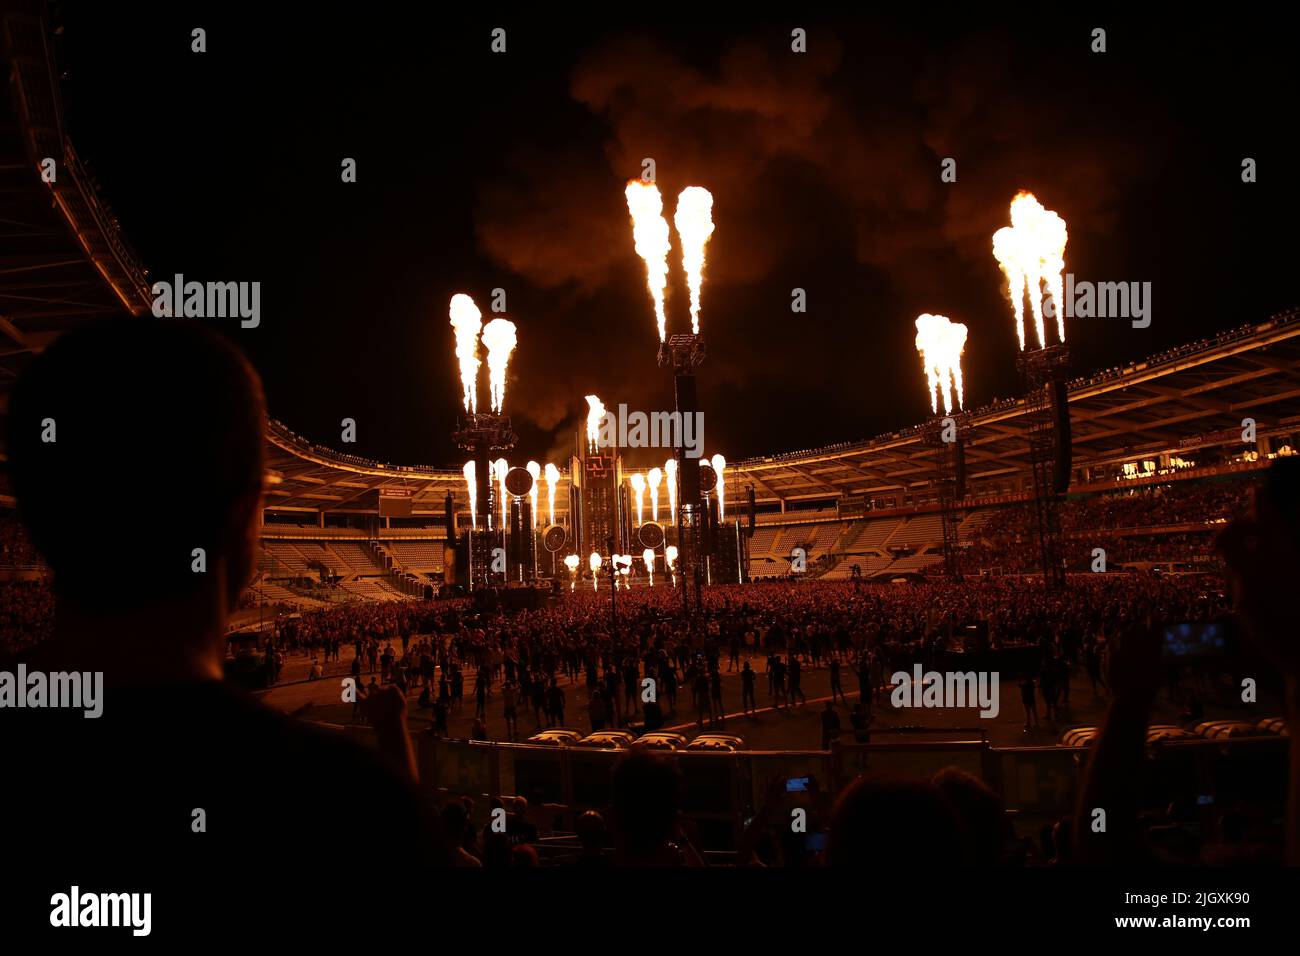 TURIN, ITALY - JULY 12 : Rammstein concert during 'Europe Stadium Tour 2022' on July 12, 2022 in Turin, Italy Stock Photo